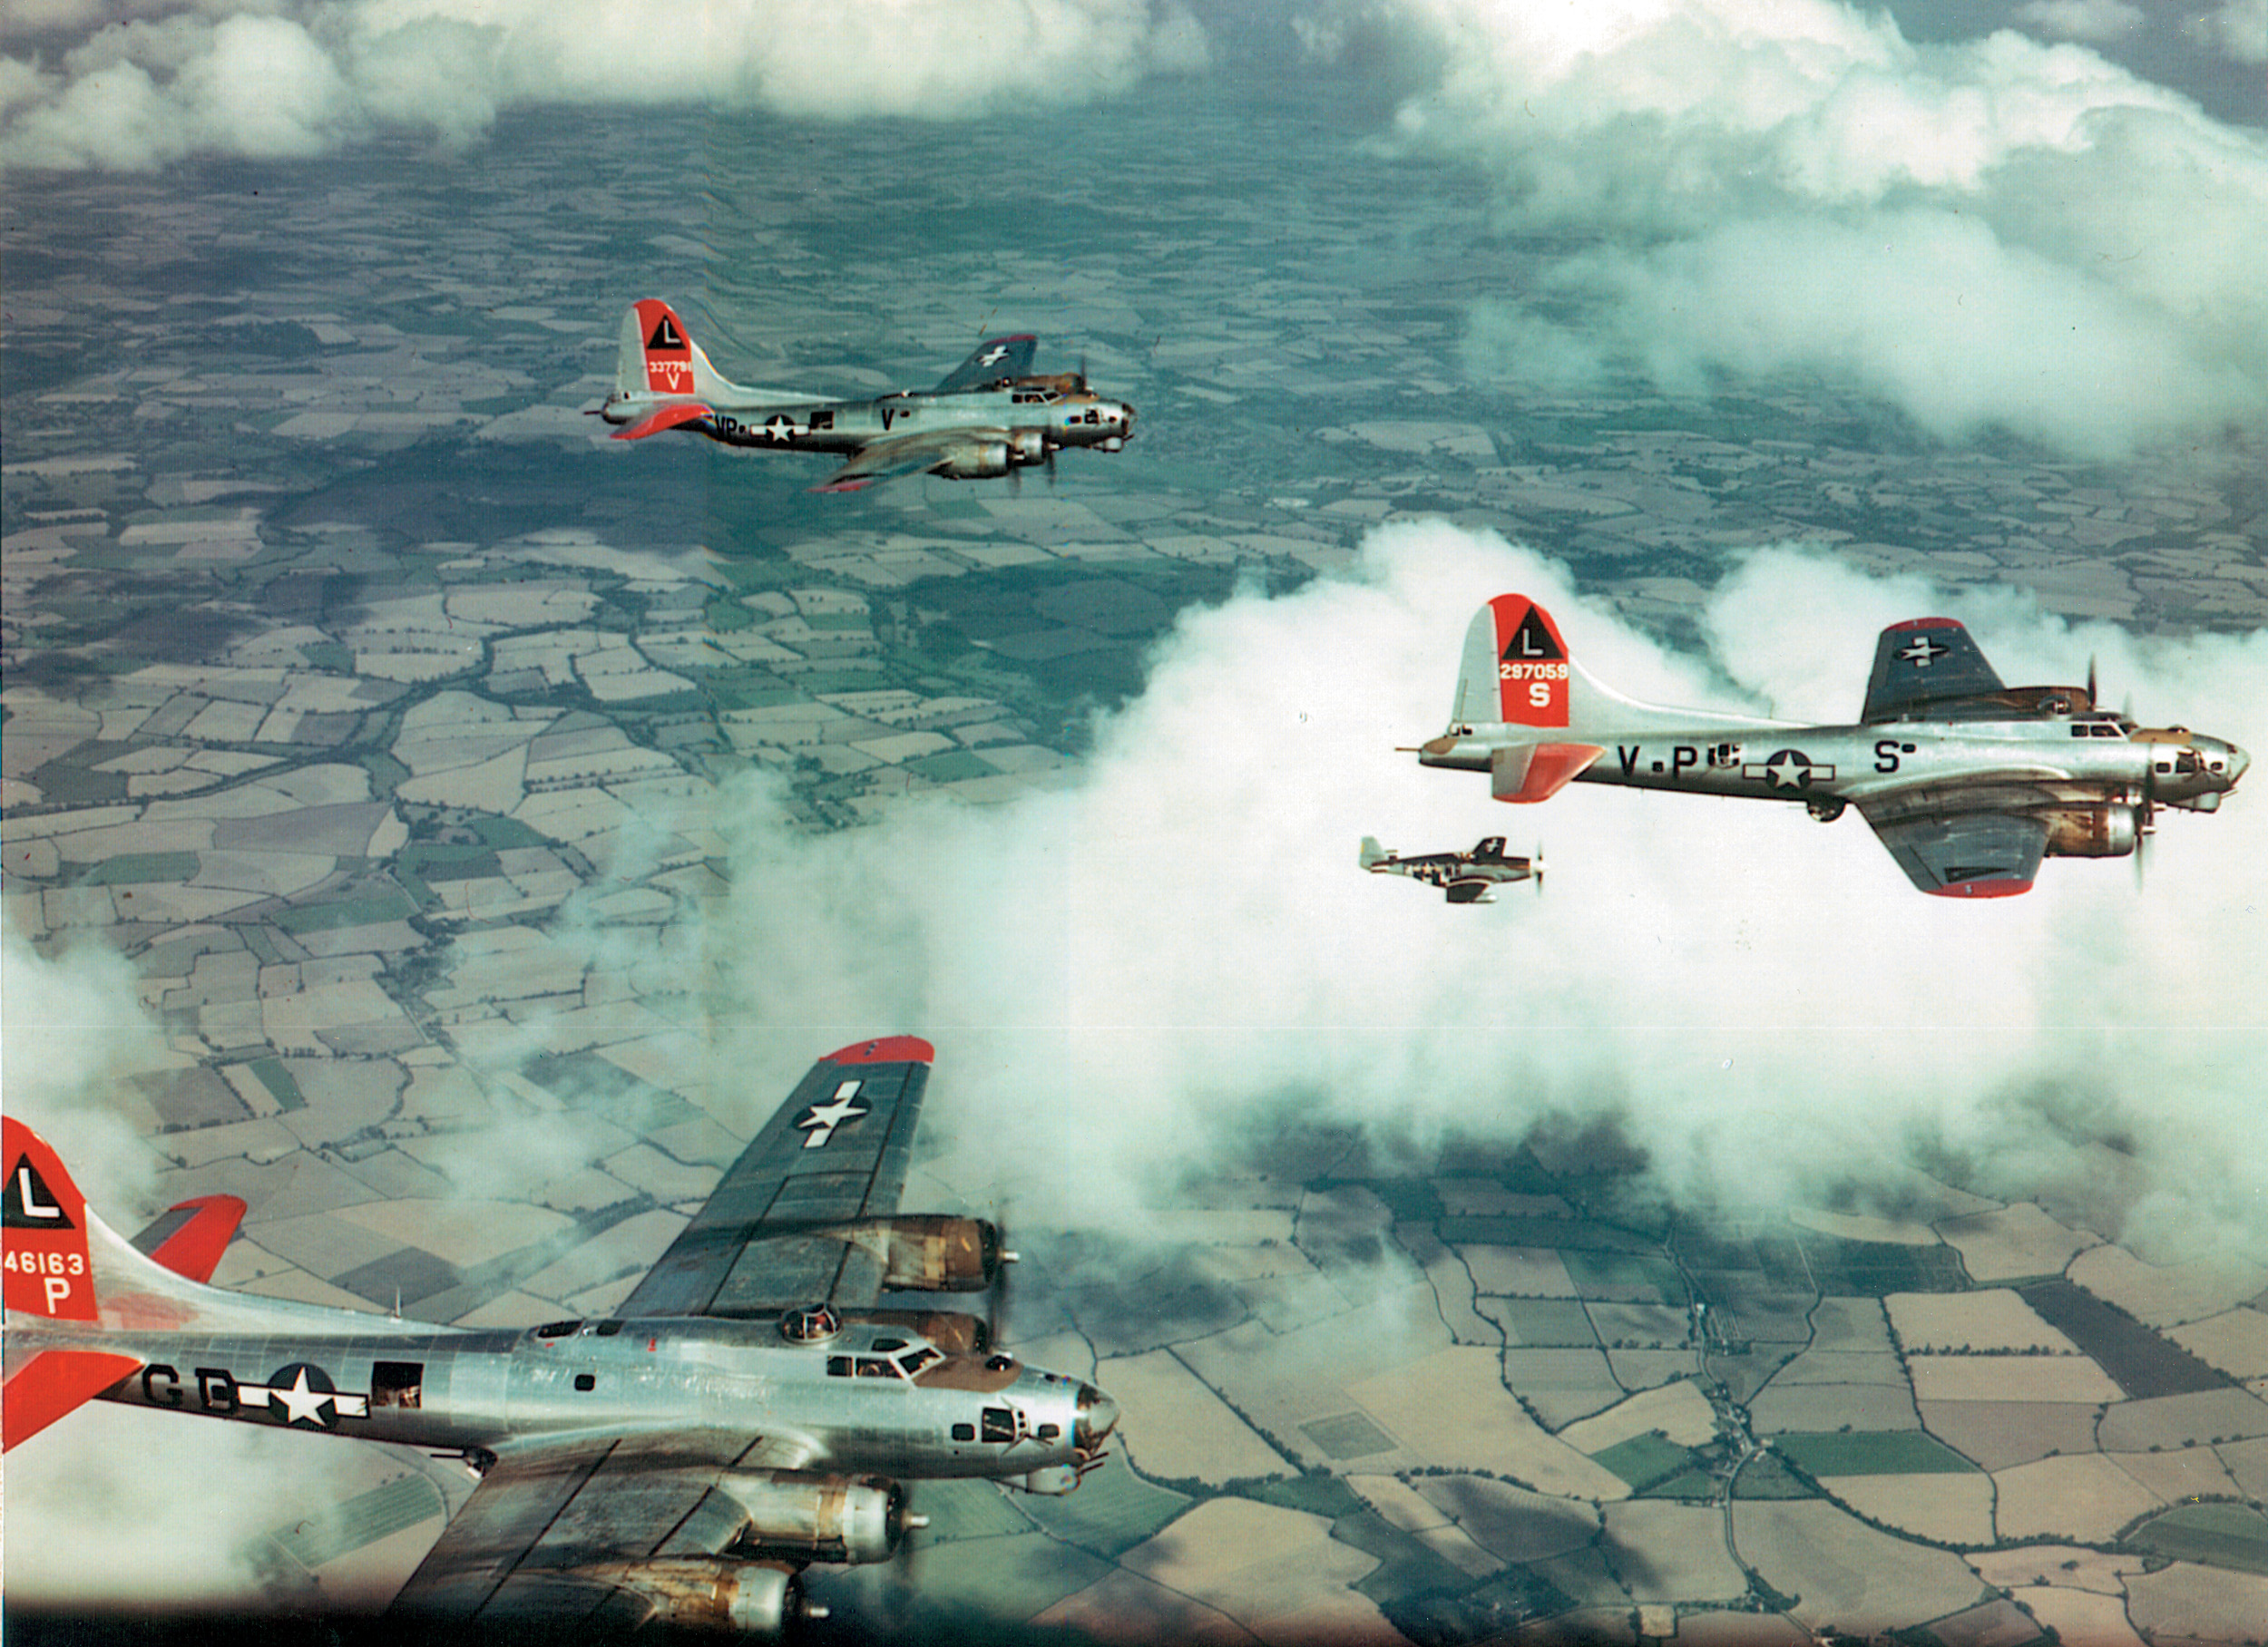 A P-51 Mustang fighter escorts Eighth Air Force bombers during a raid on a target deep inside Germany. The development of a fighter that could accompany the heavy bombers all the way to and from their distant targets helped to reduce losses from attacks by German fighters defending their homeland.